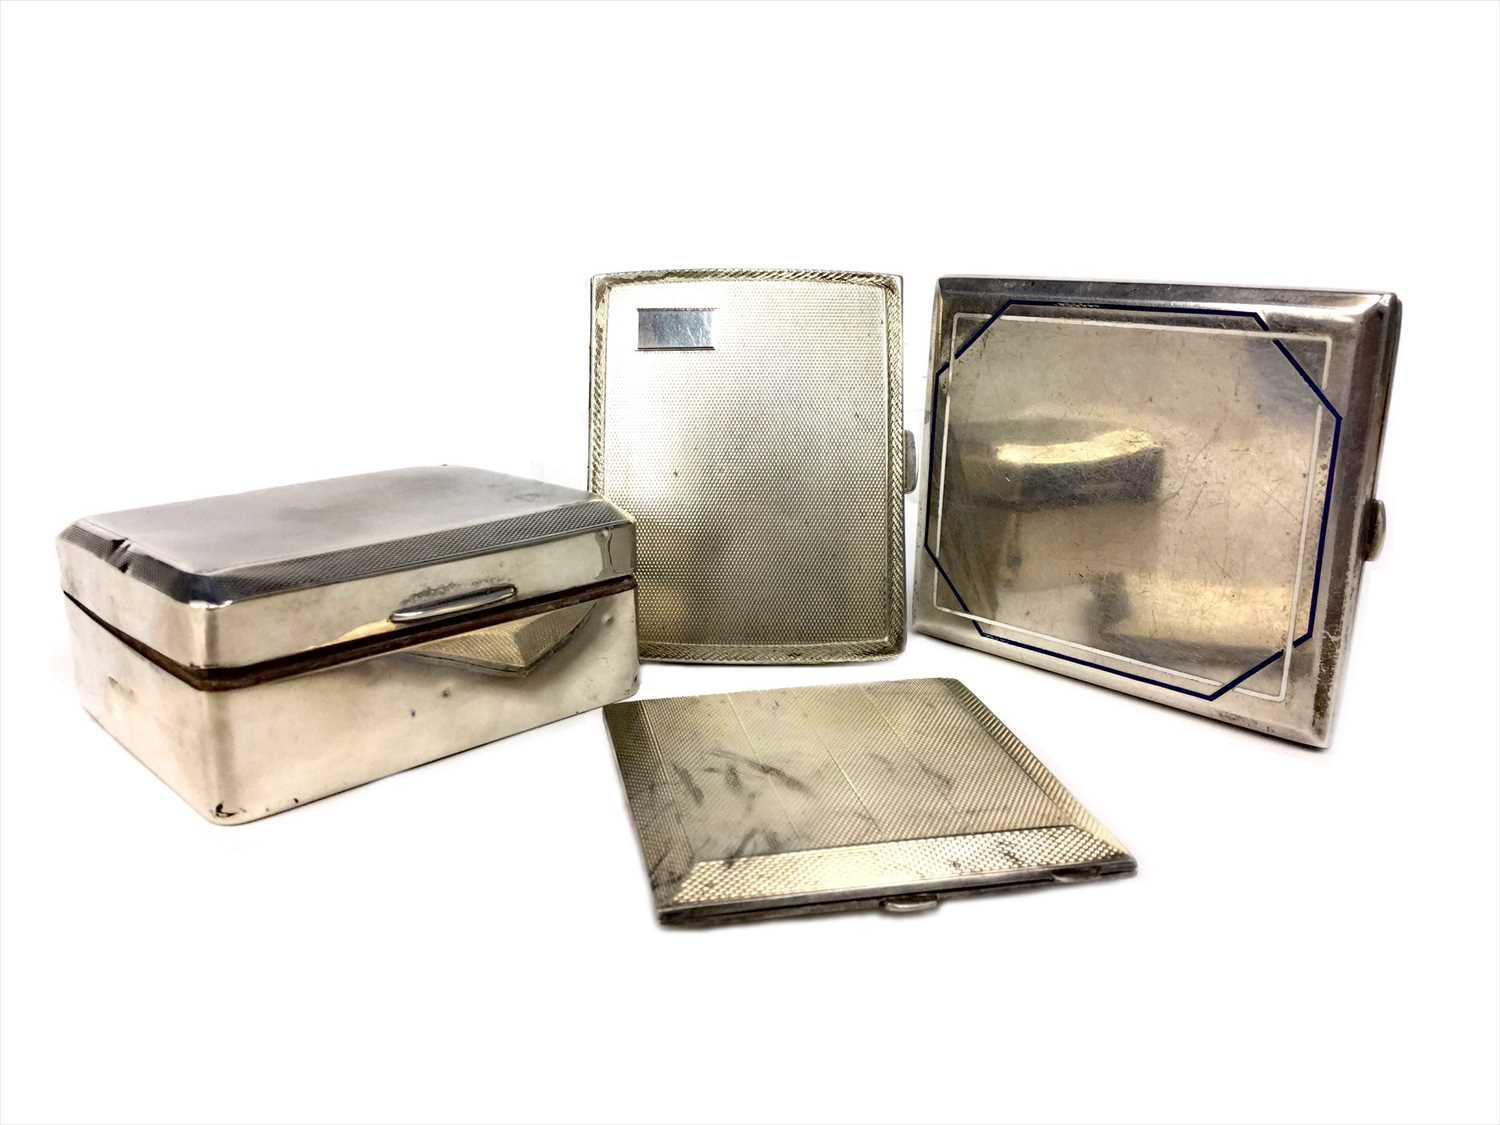 Lot 839 - A GEORGE V SILVER CIGARETTE BOX ALONG WITH TWO SILVER CIGARETTE CASES AND A COMPACT